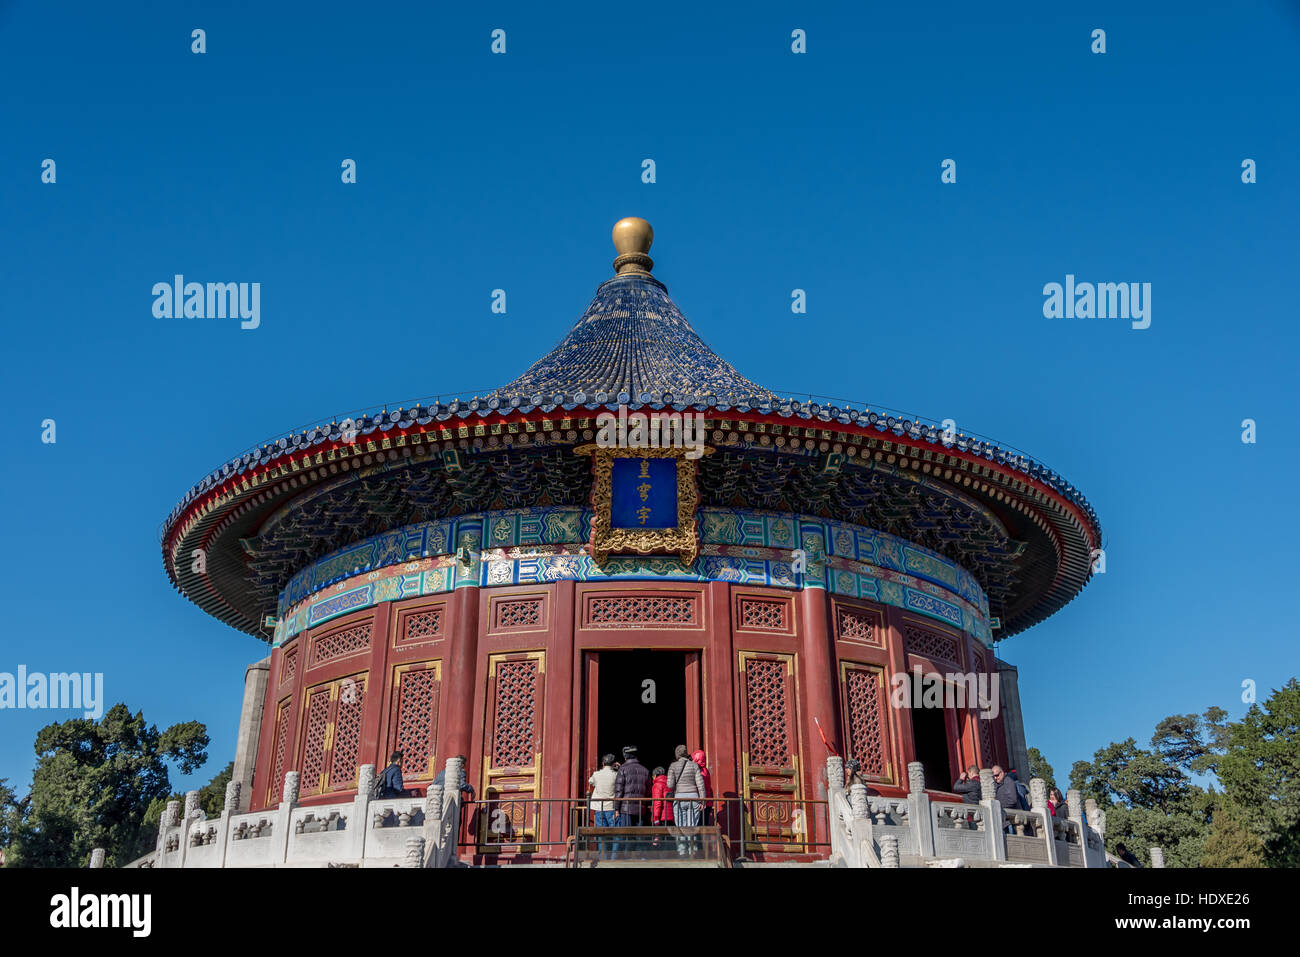 Imperial Vault of Heaven, Temple of Heaven, Beijing, China, with blue sky and tourists looking inside doorway. Stock Photo